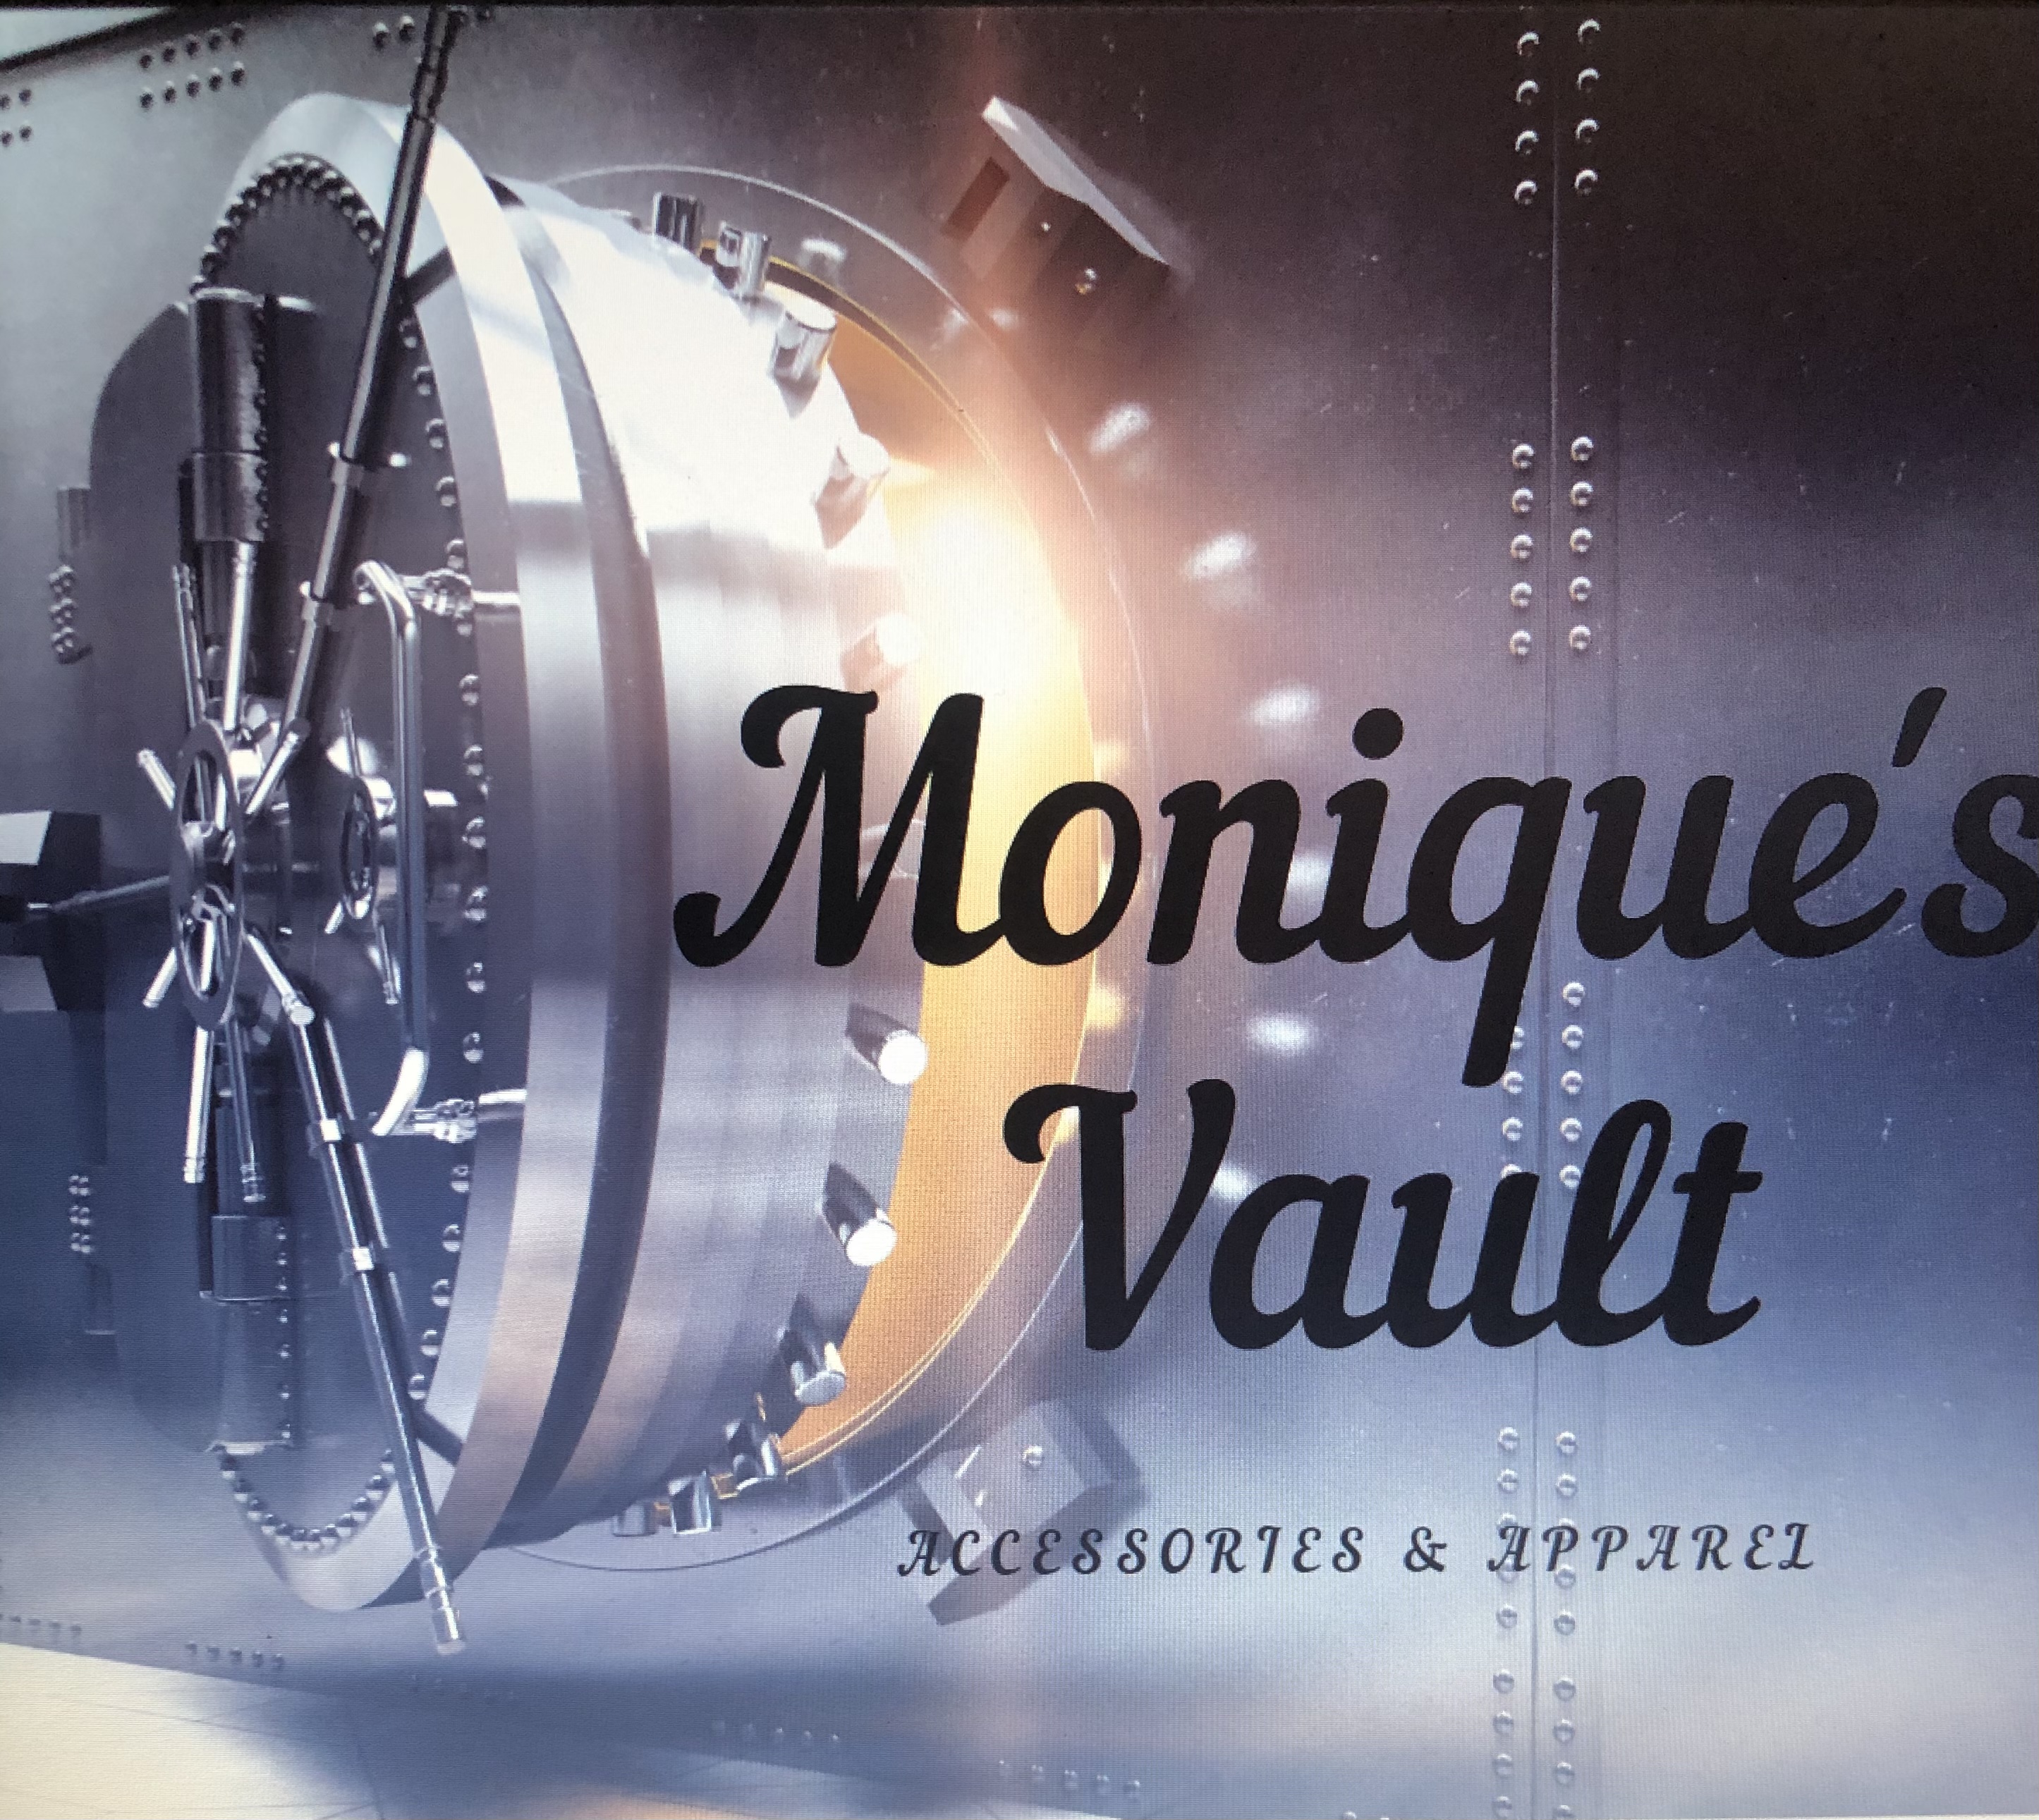 The logo or business face of "Monique’s Vault Accessories & Apparel "